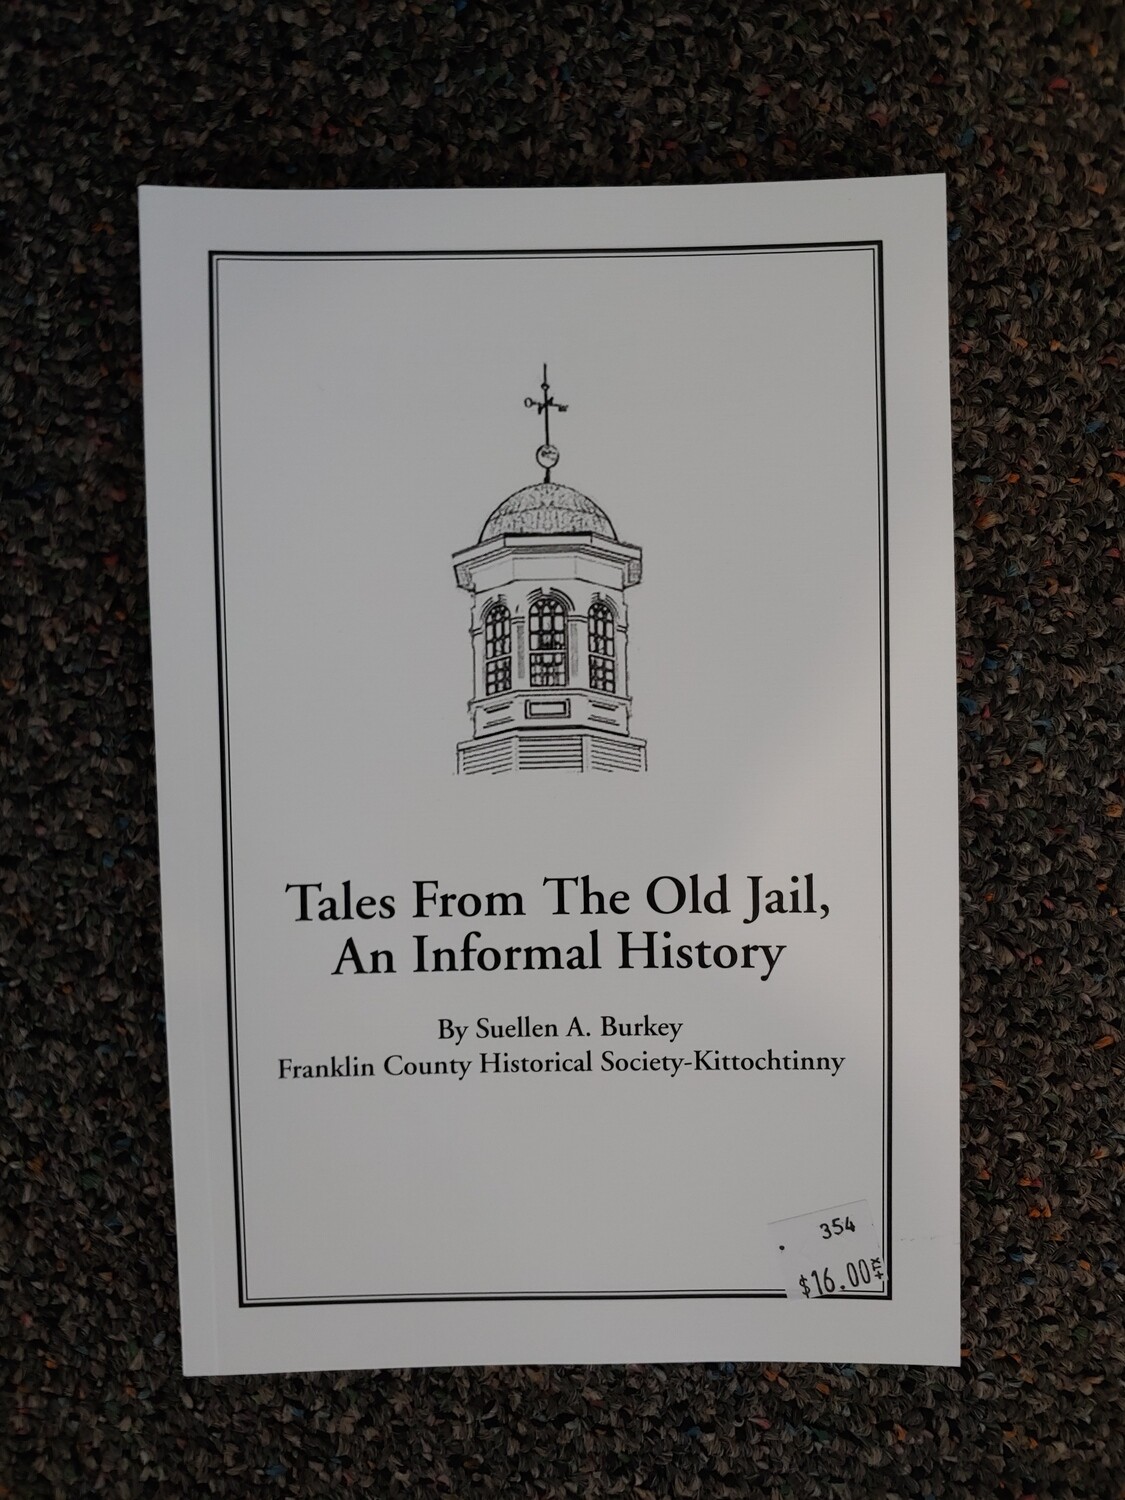 Tales From the Old Jail "An Informal History"